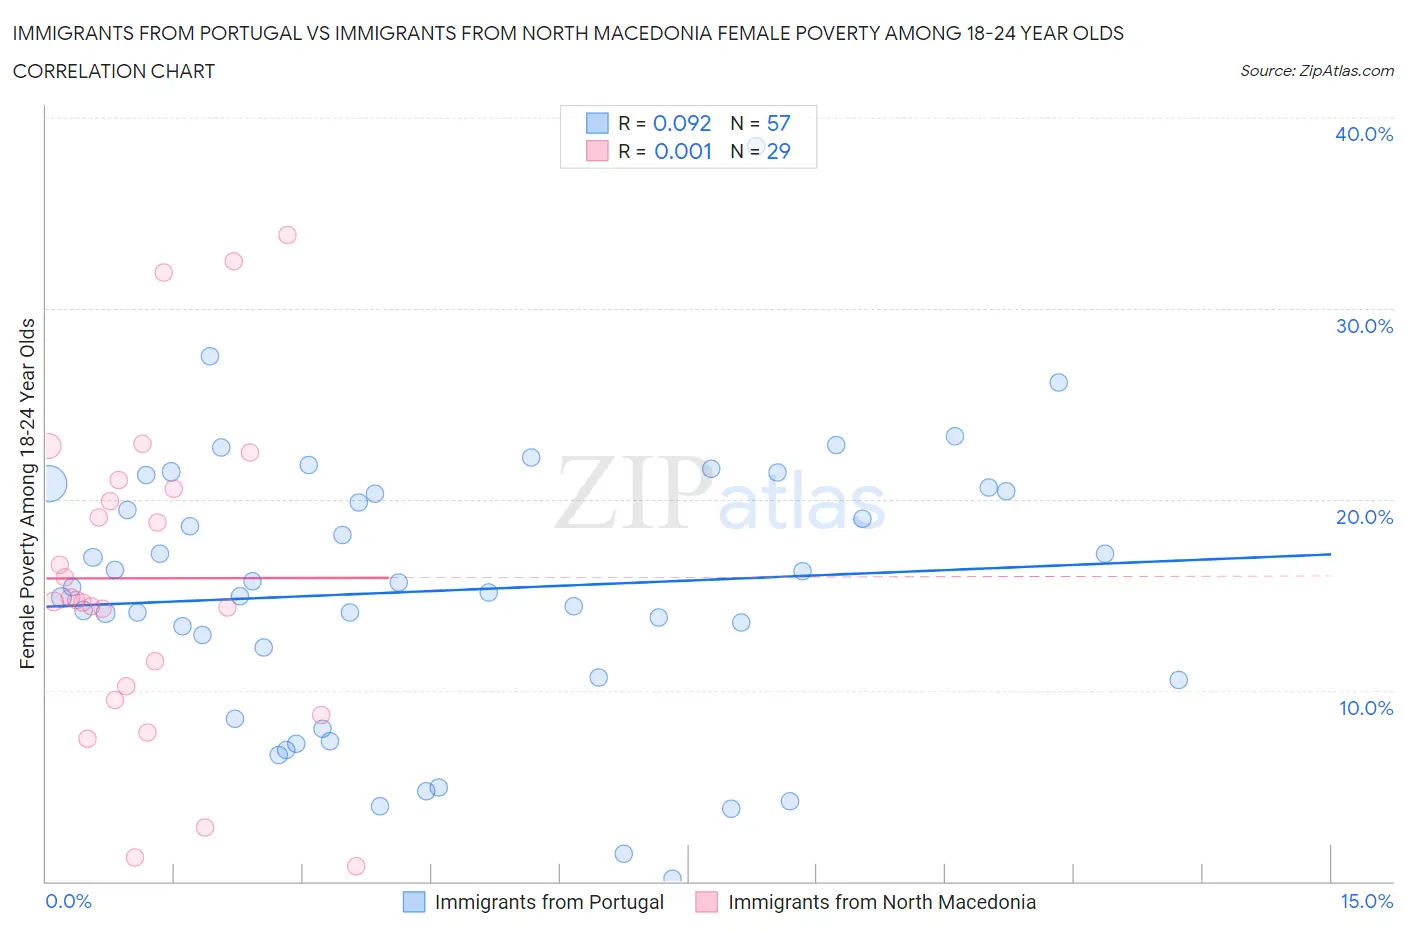 Immigrants from Portugal vs Immigrants from North Macedonia Female Poverty Among 18-24 Year Olds